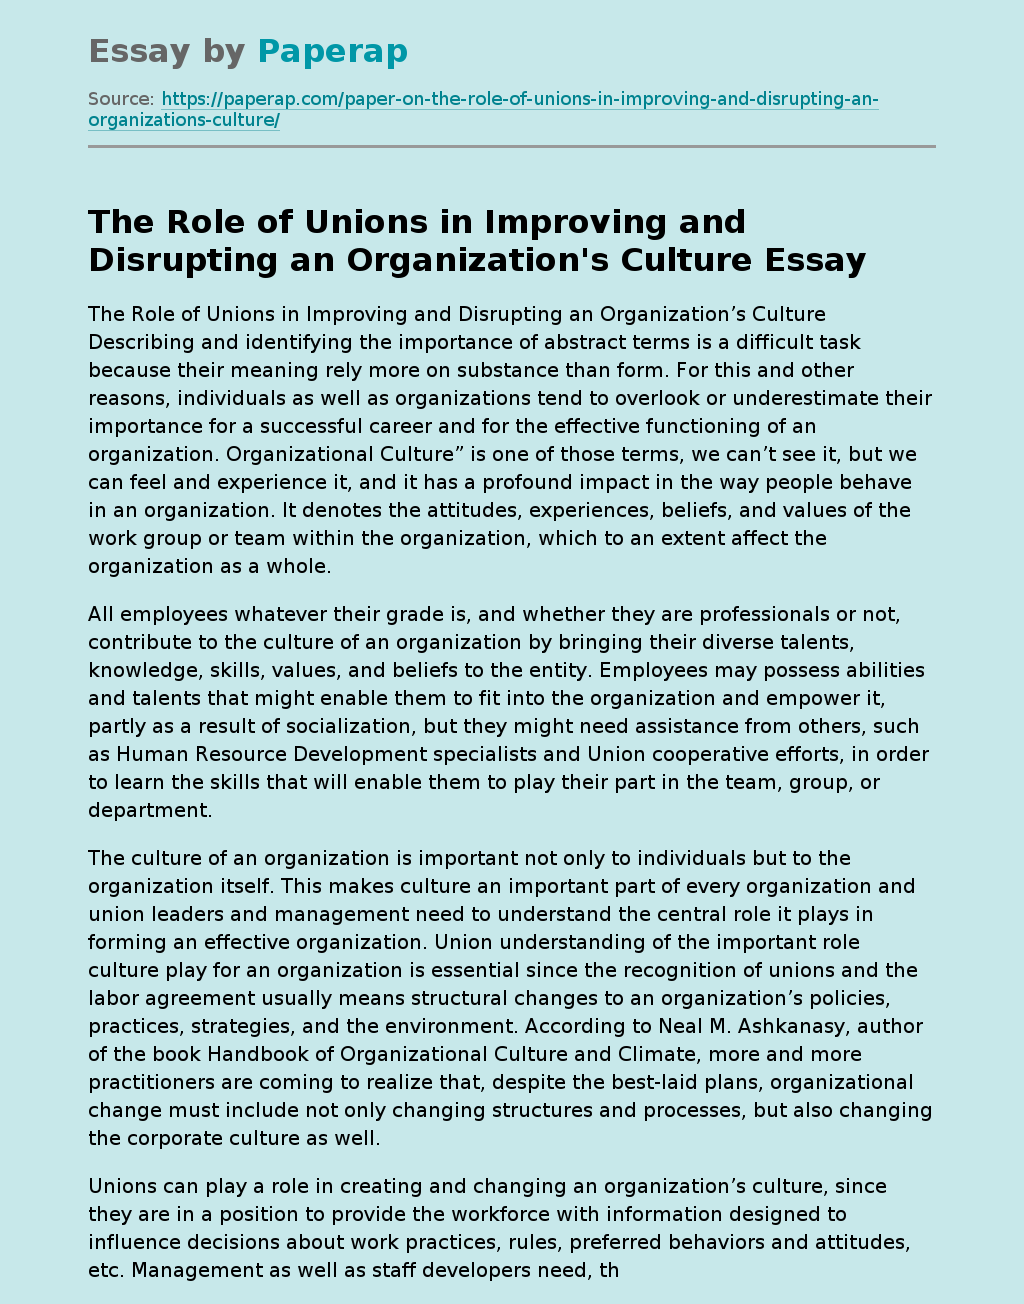 The Role of Unions in Improving and Disrupting an Organization's Culture